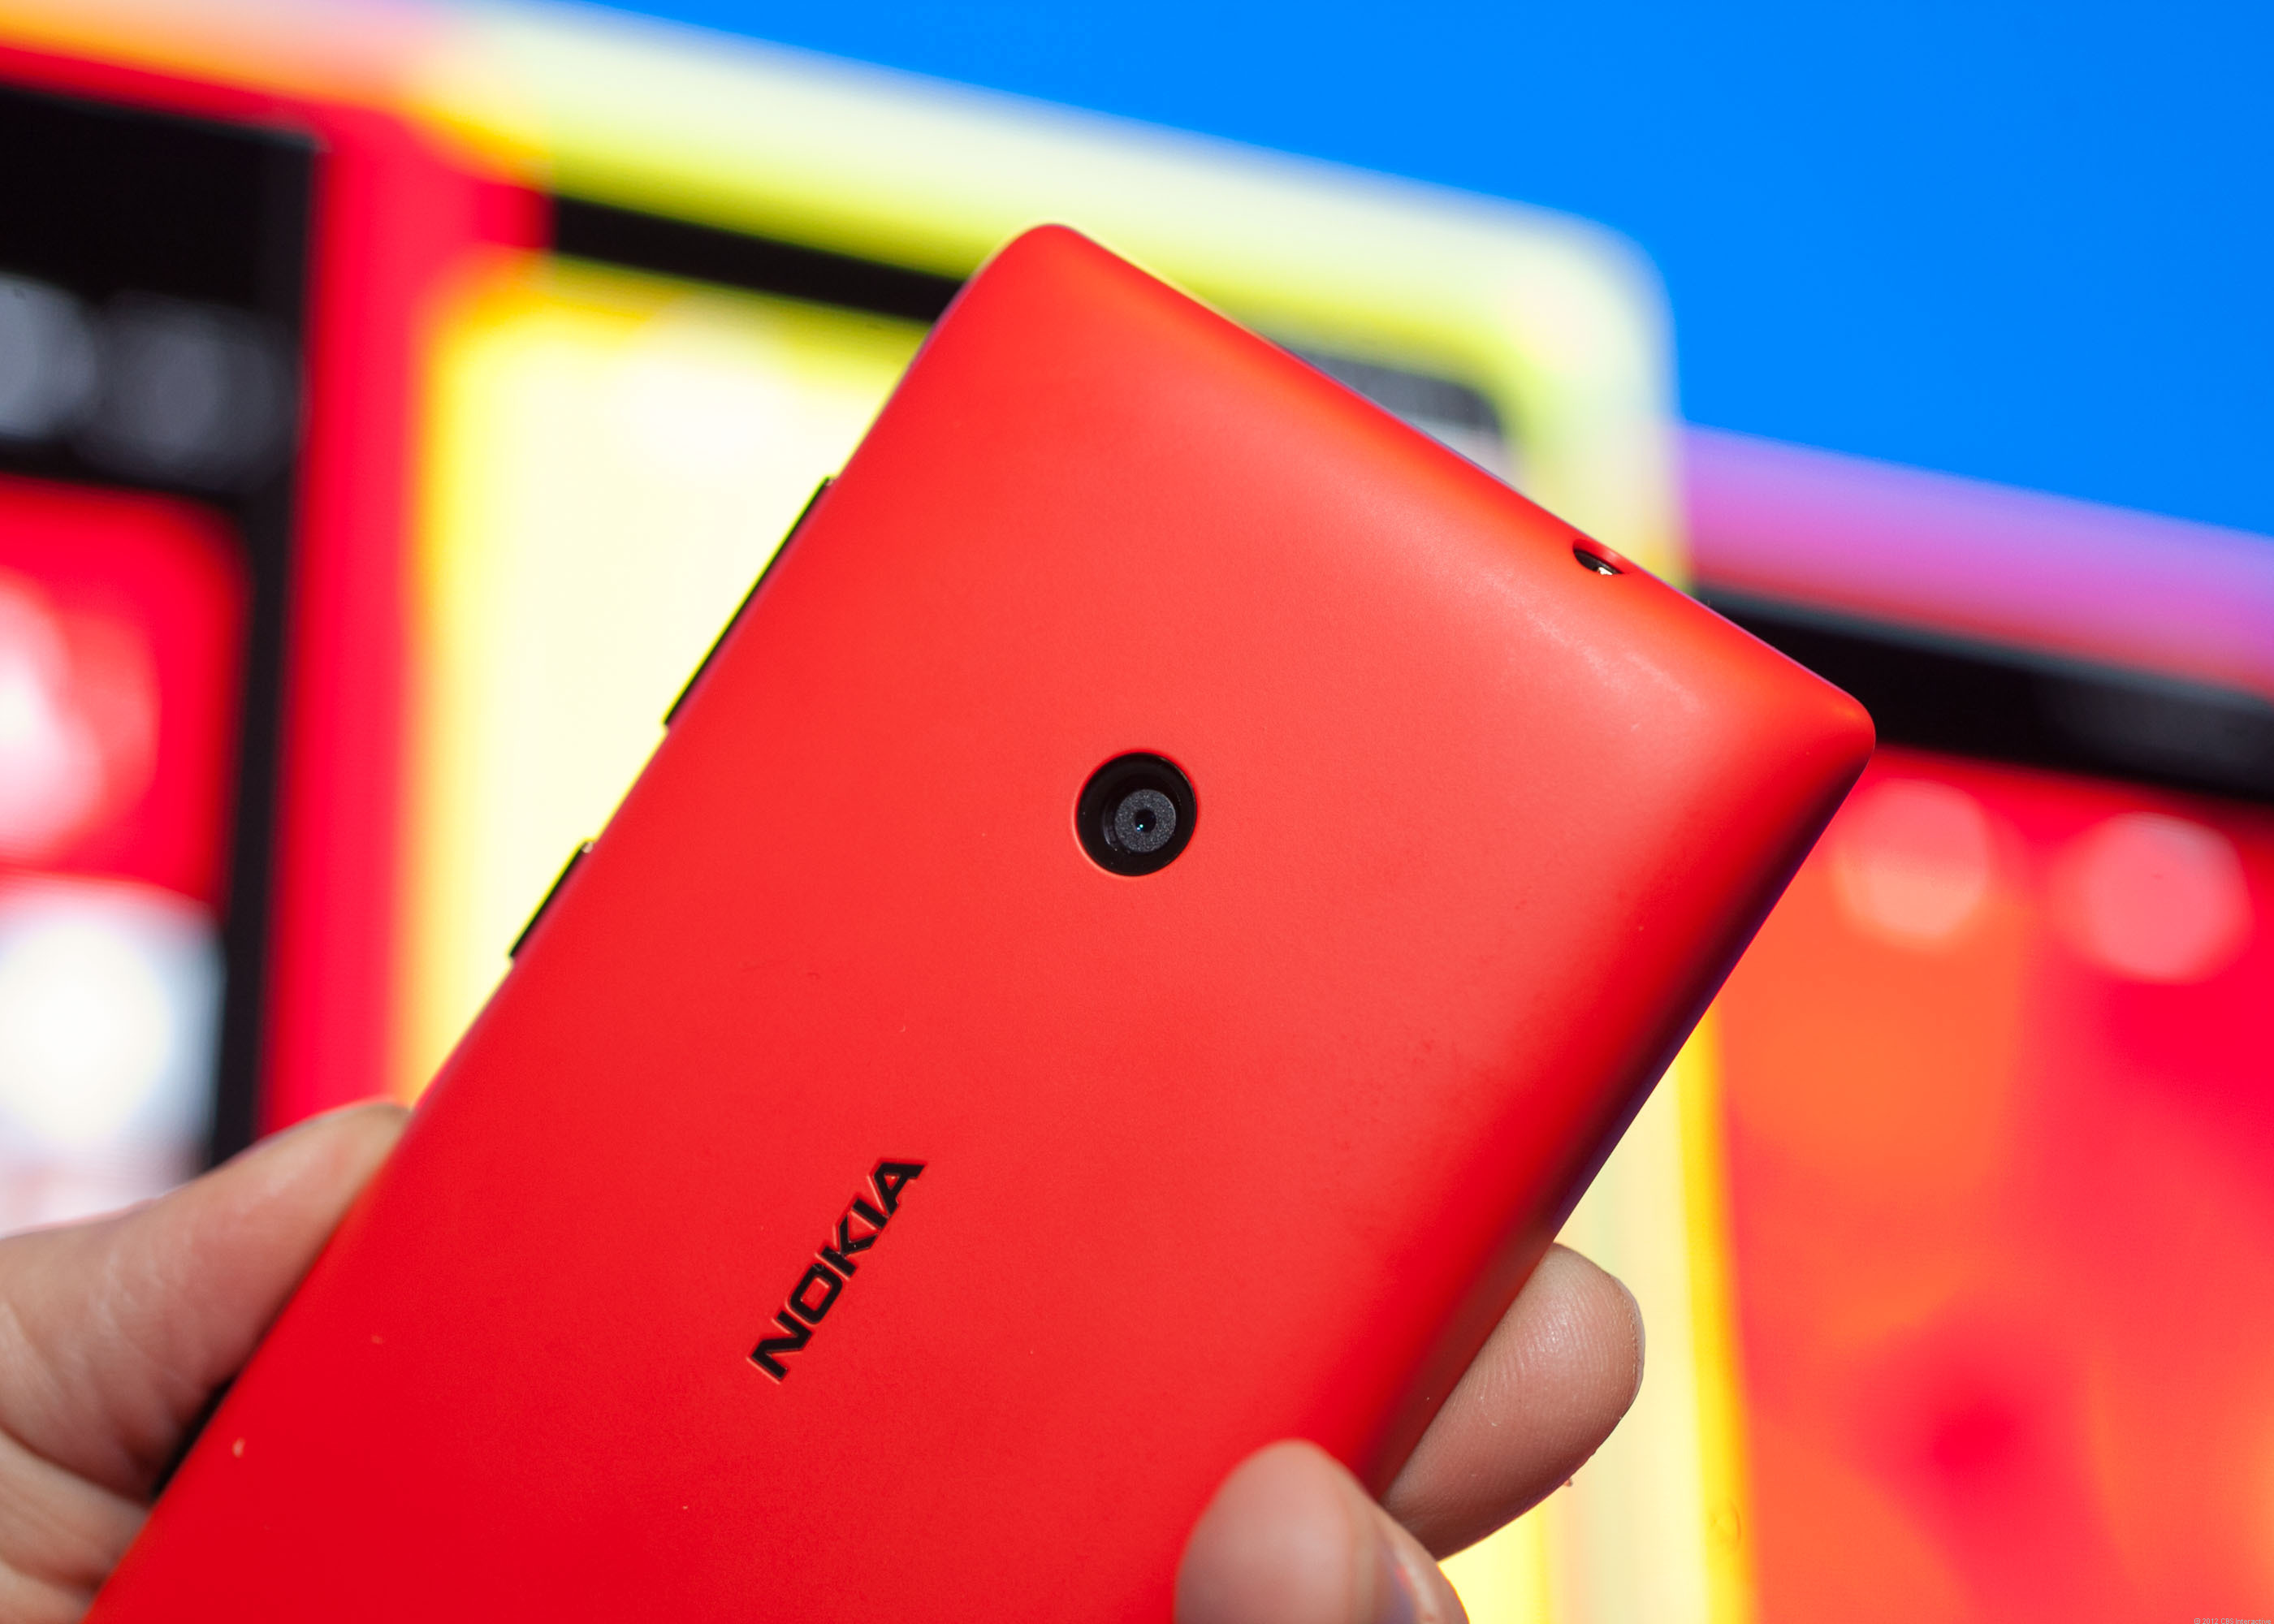 Nokia Lumia red color wallpapers and images wallpapers